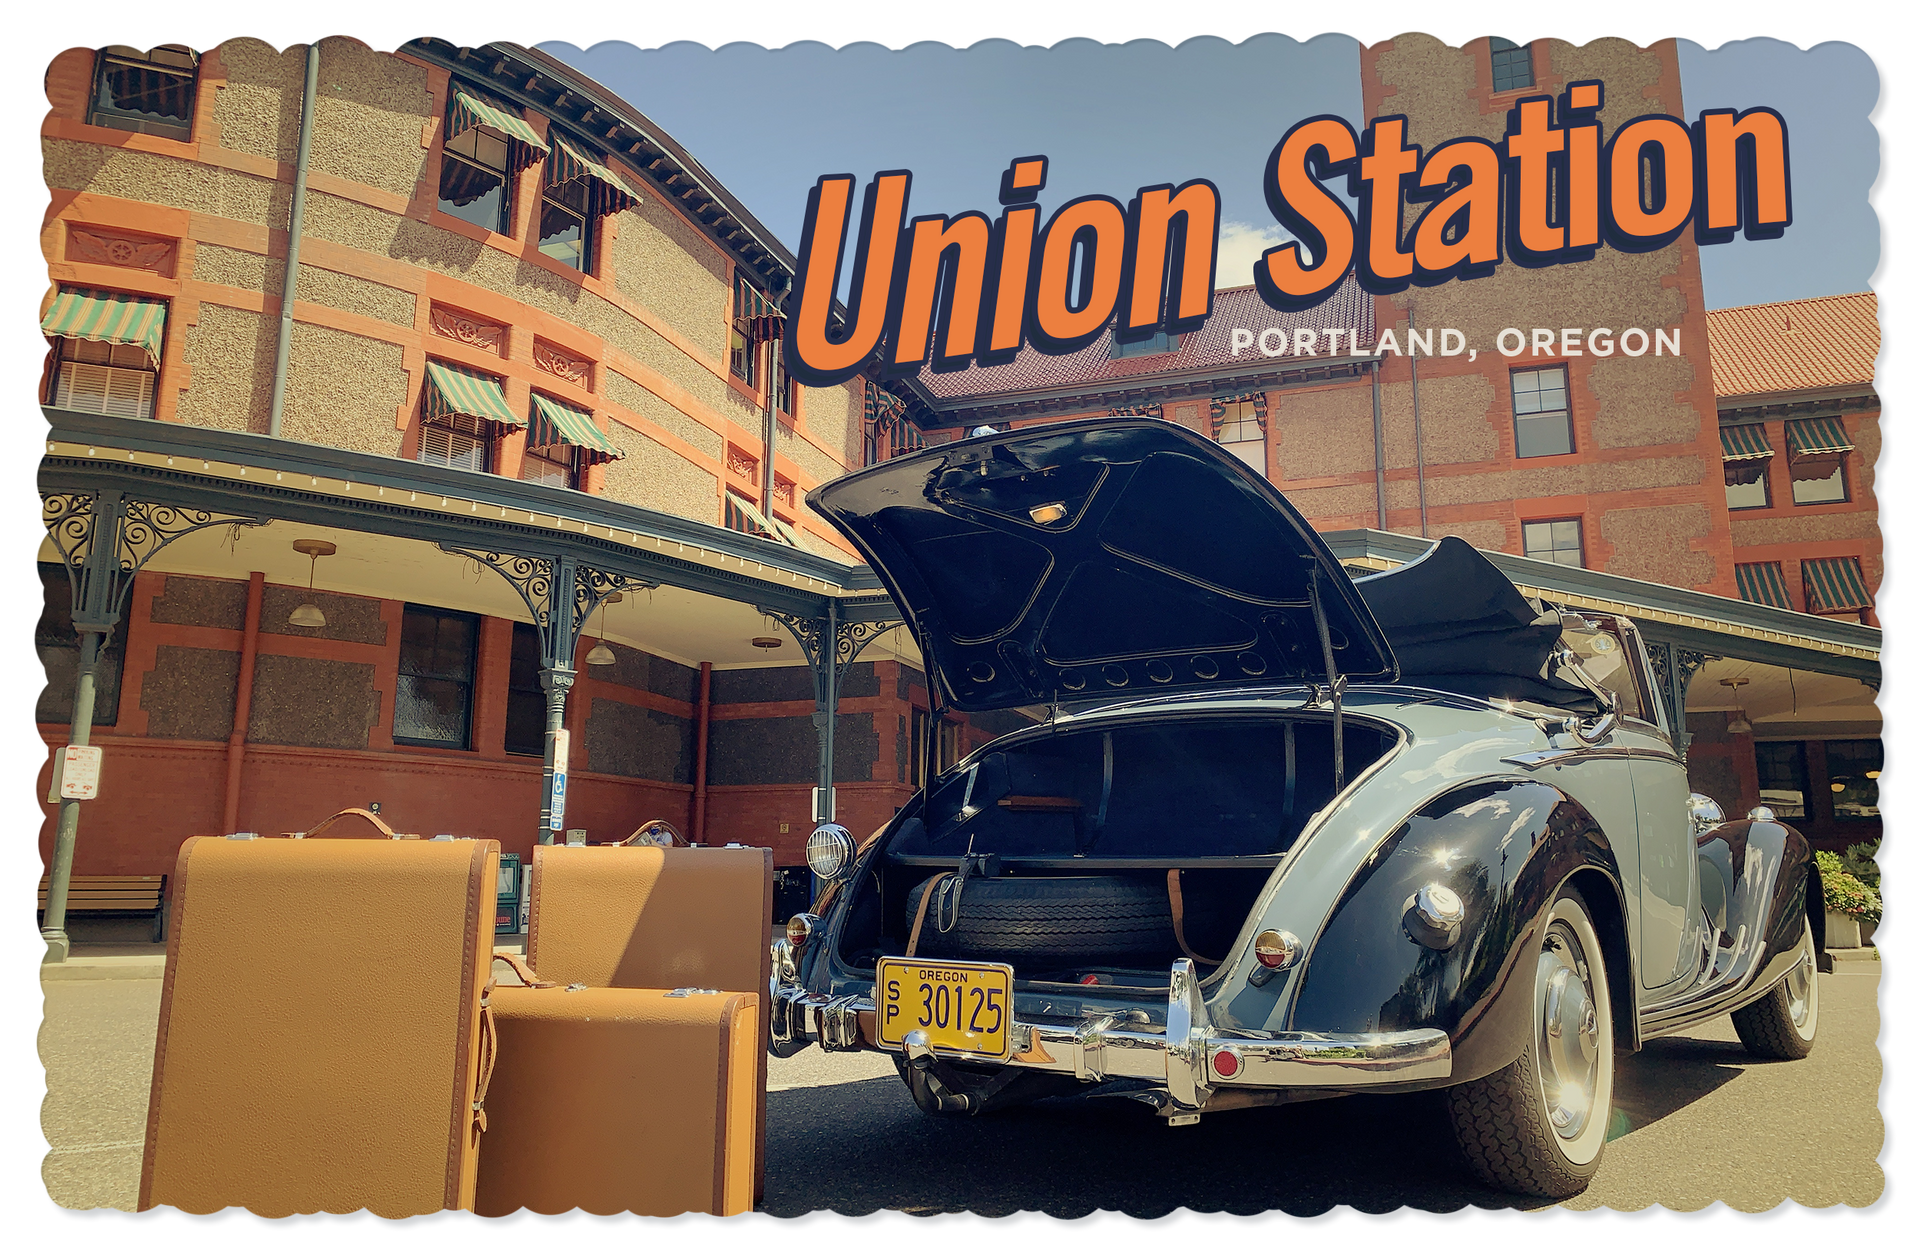 a vintage car is parked in front of the union station